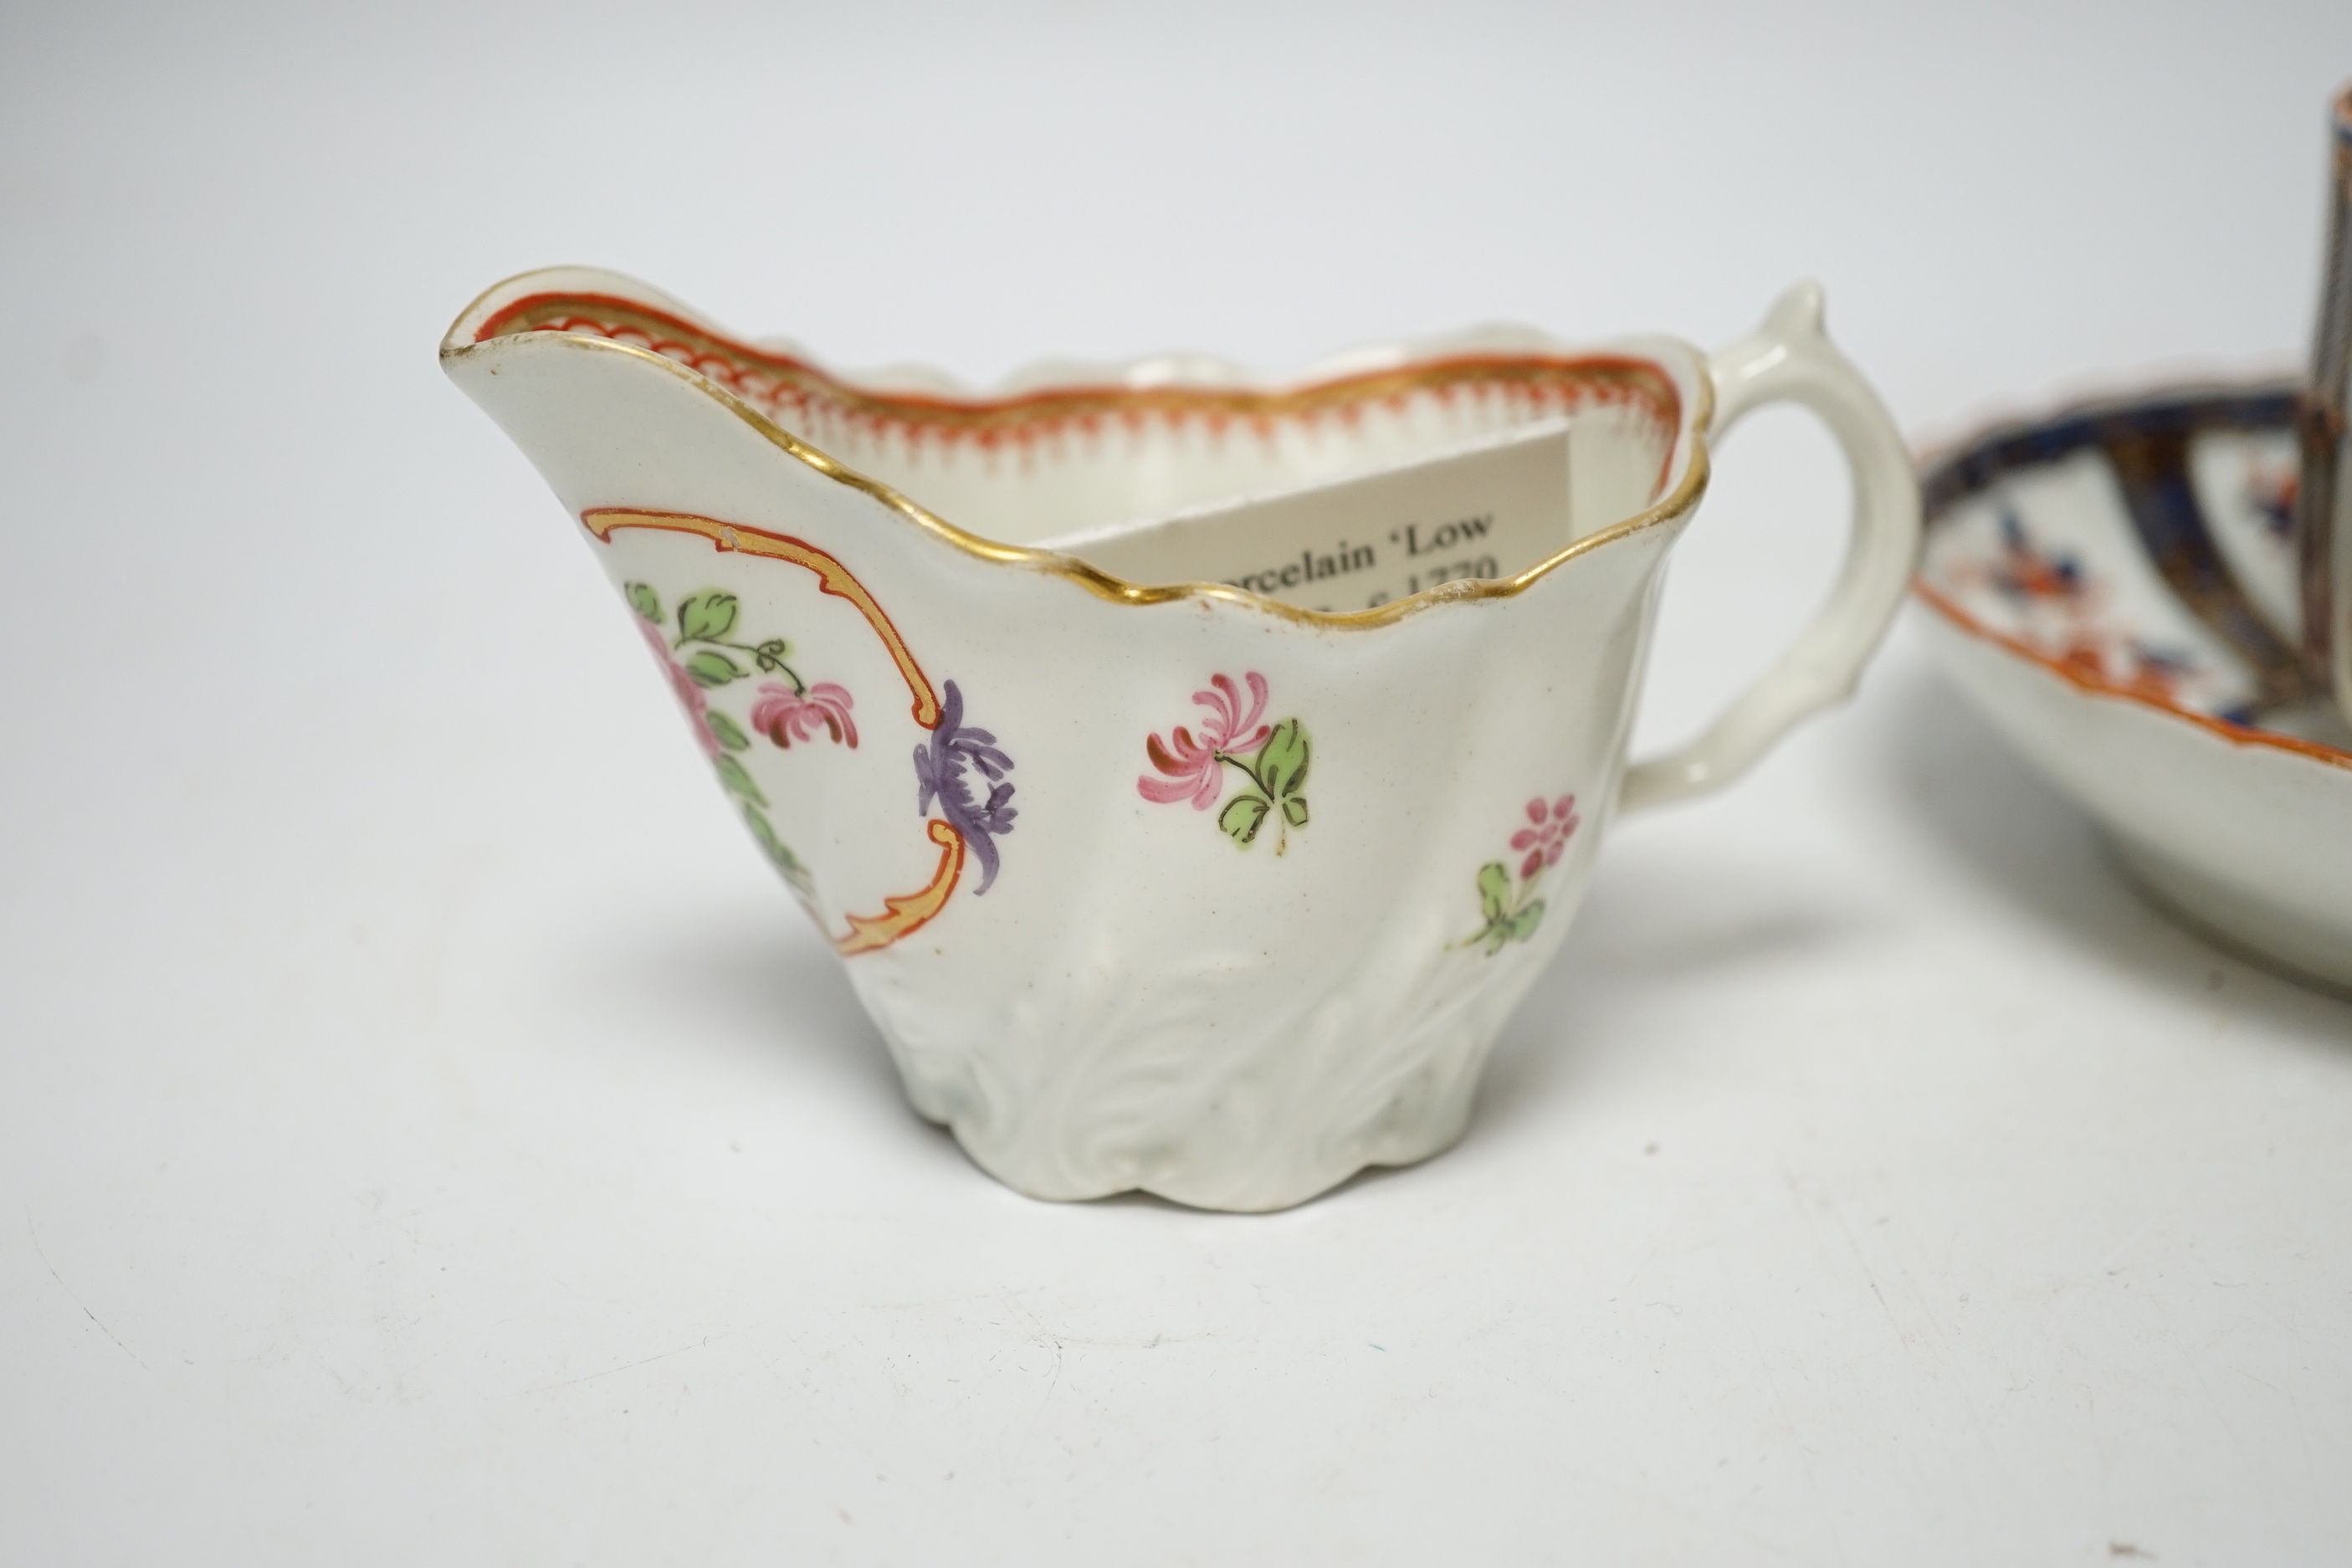 A Worcester carnation pattern dessert dish c. 1770, Royal Lily pattern saucer dish, two sugar bowls and a Plantation pattern saucer